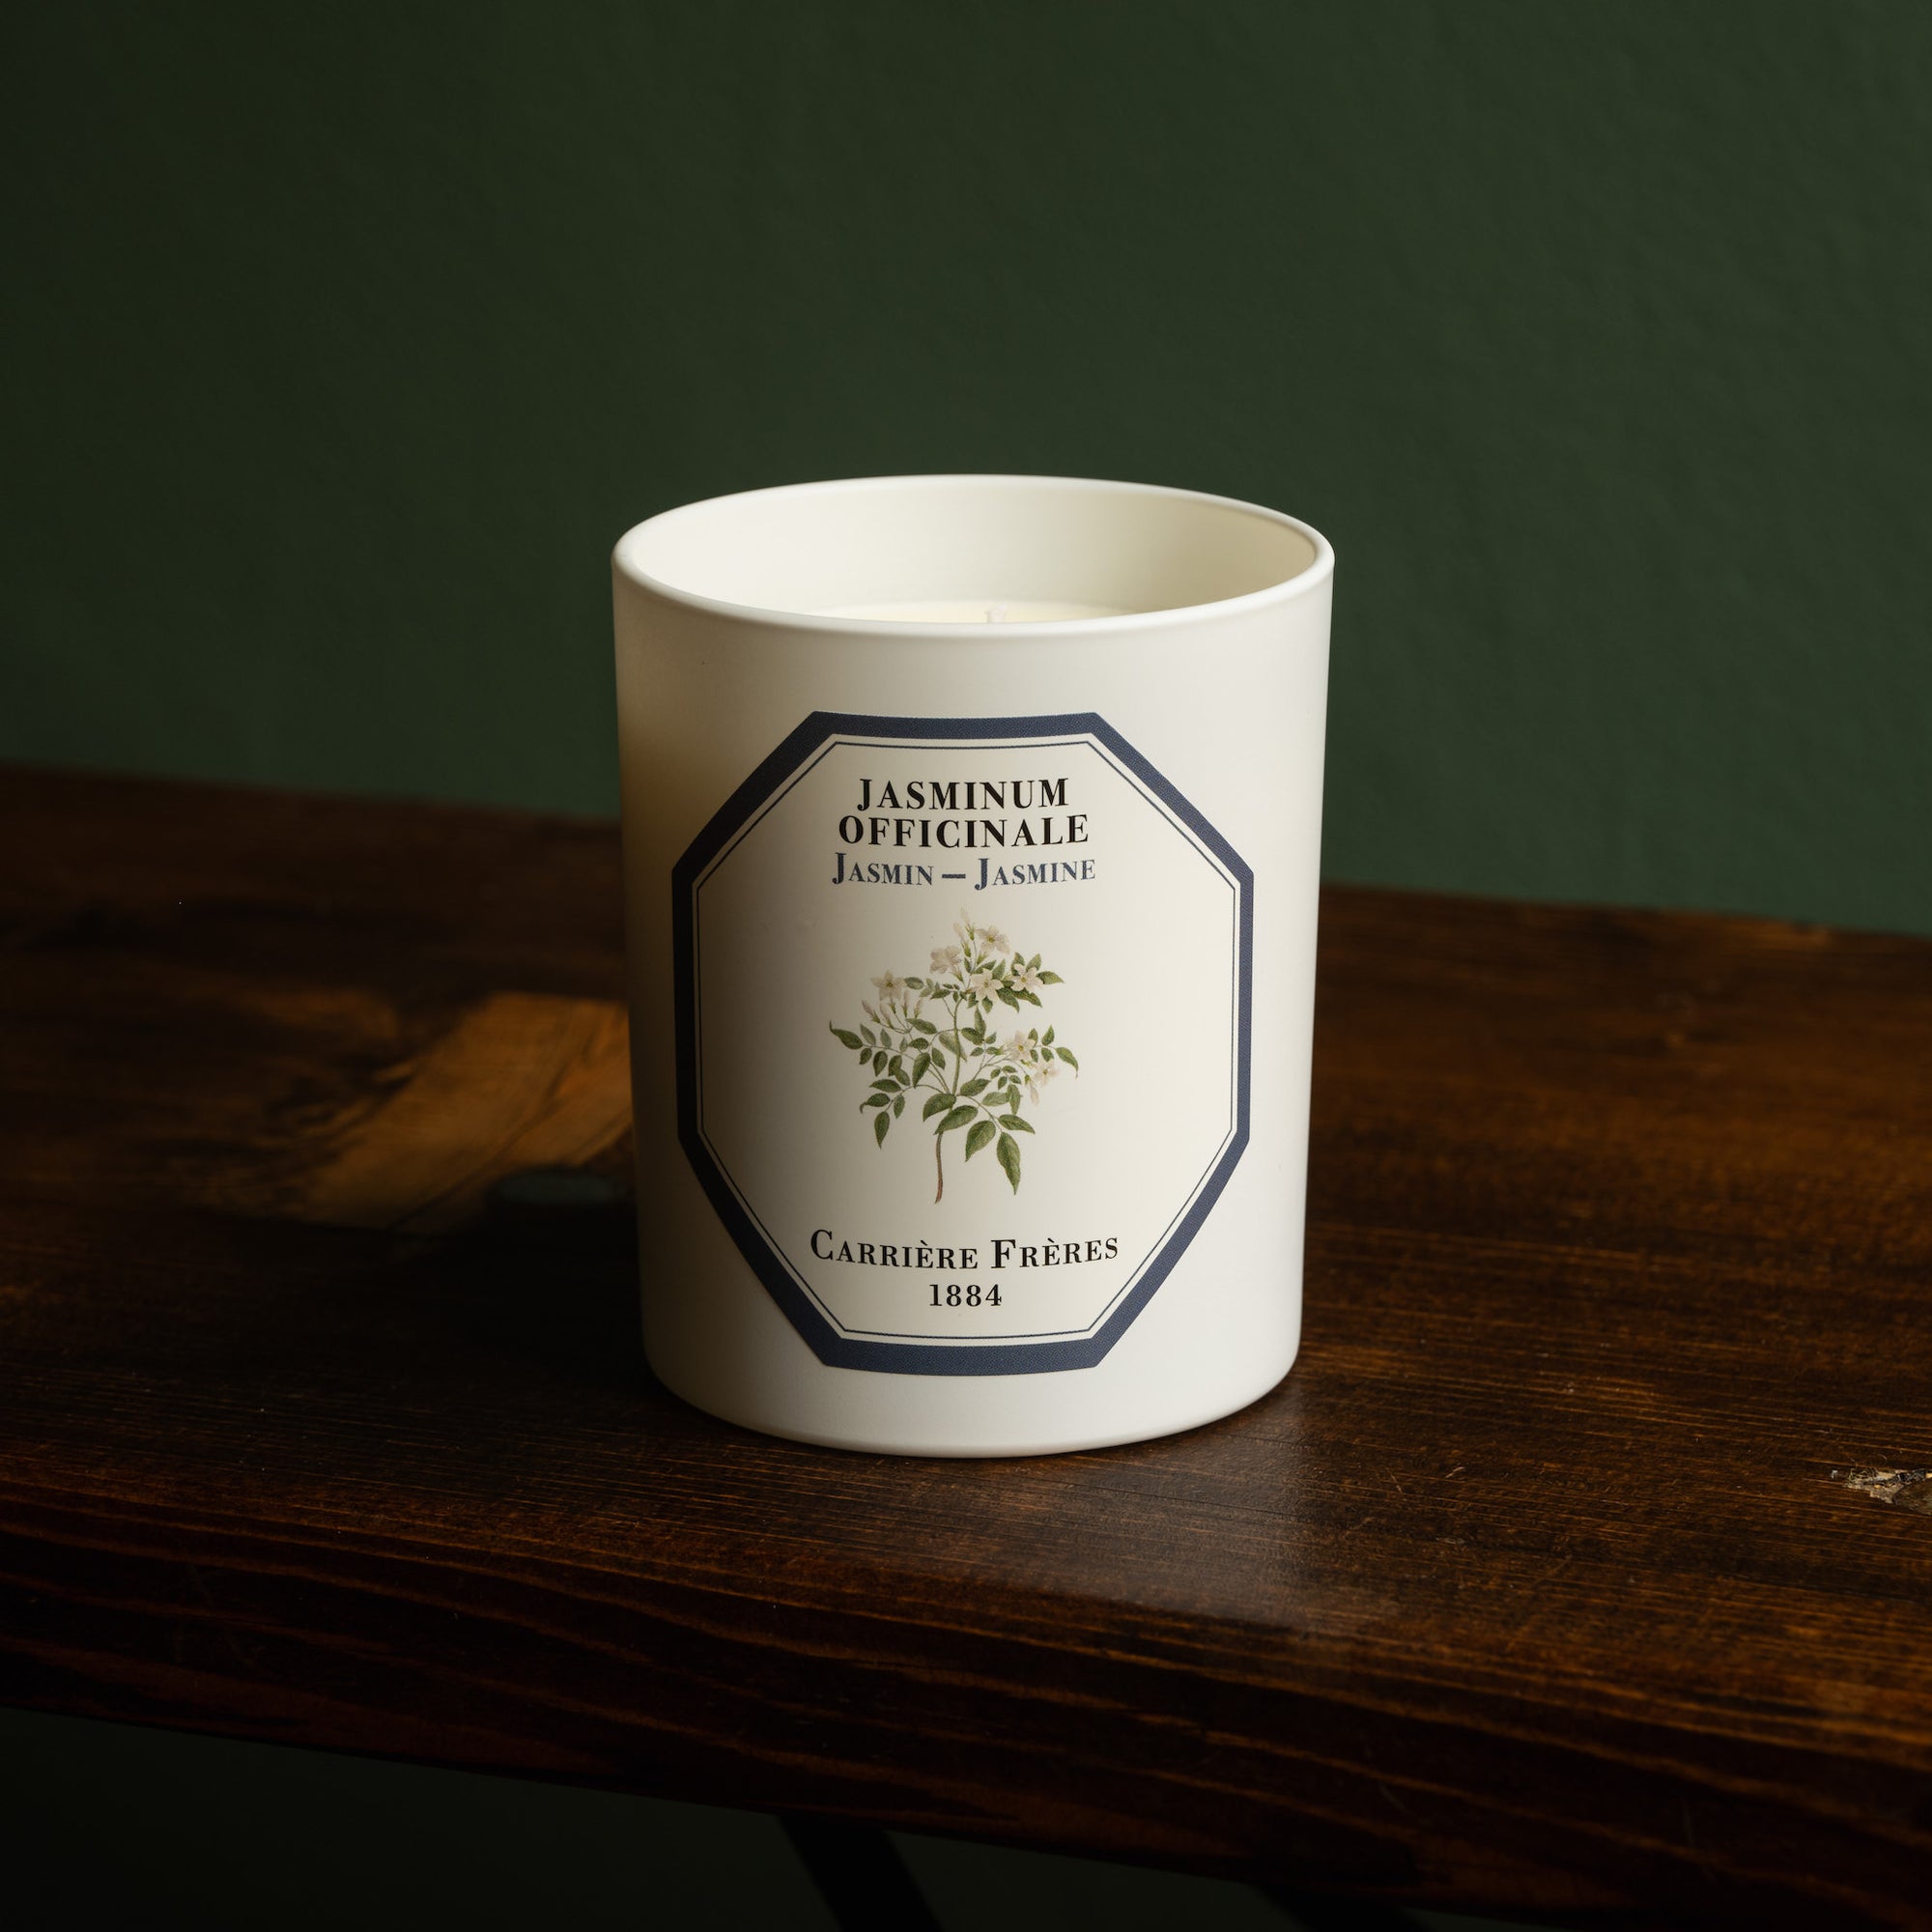 Carriere Freres Jasmine scented candle